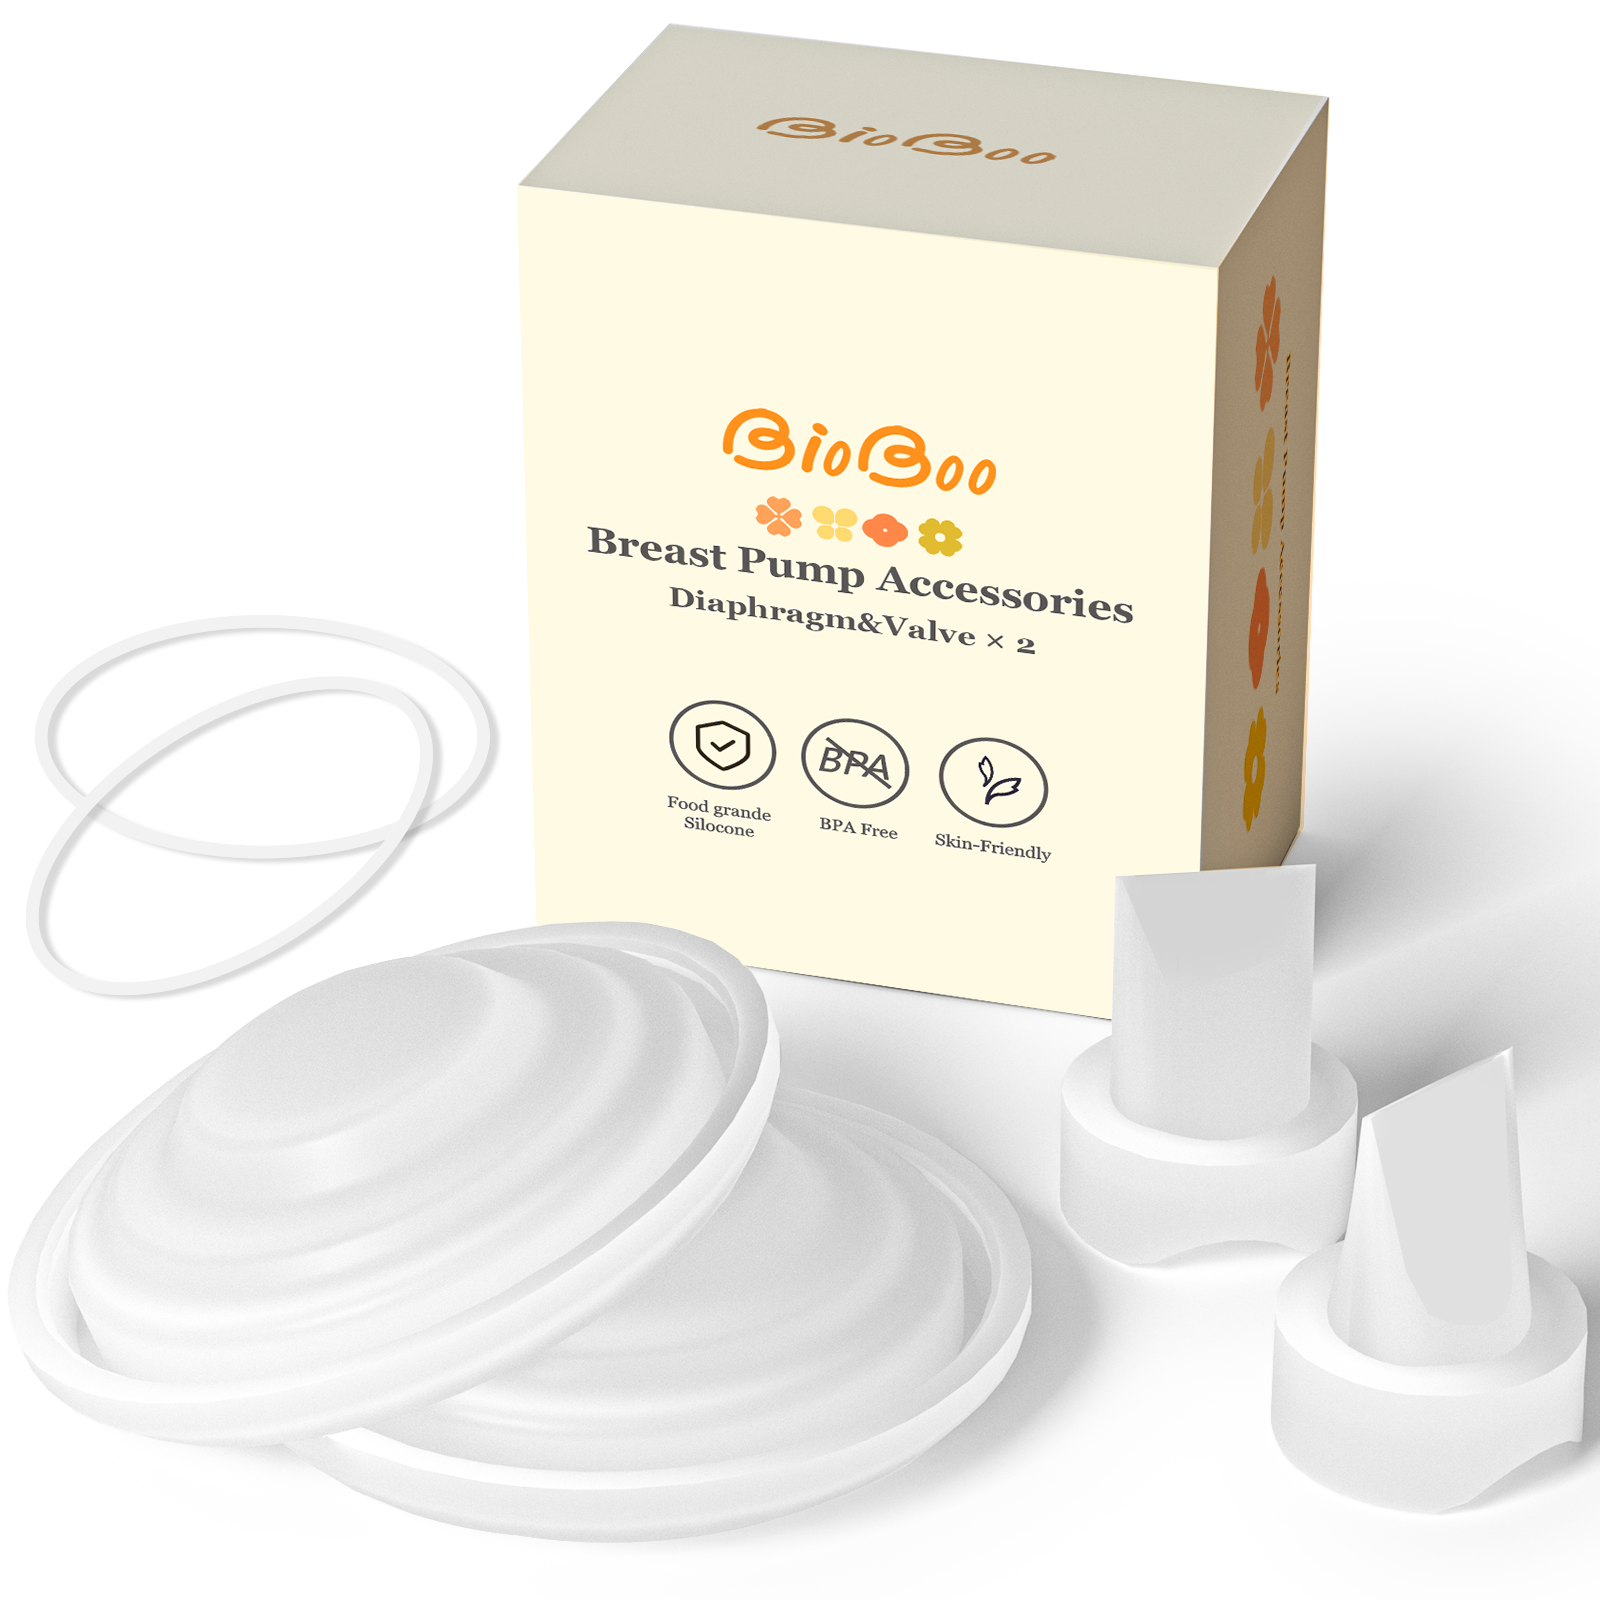 BIOBOO Breast Pump Replacement Parts-Duckbill Valves&Diaphragms&Rings, 2 Pack